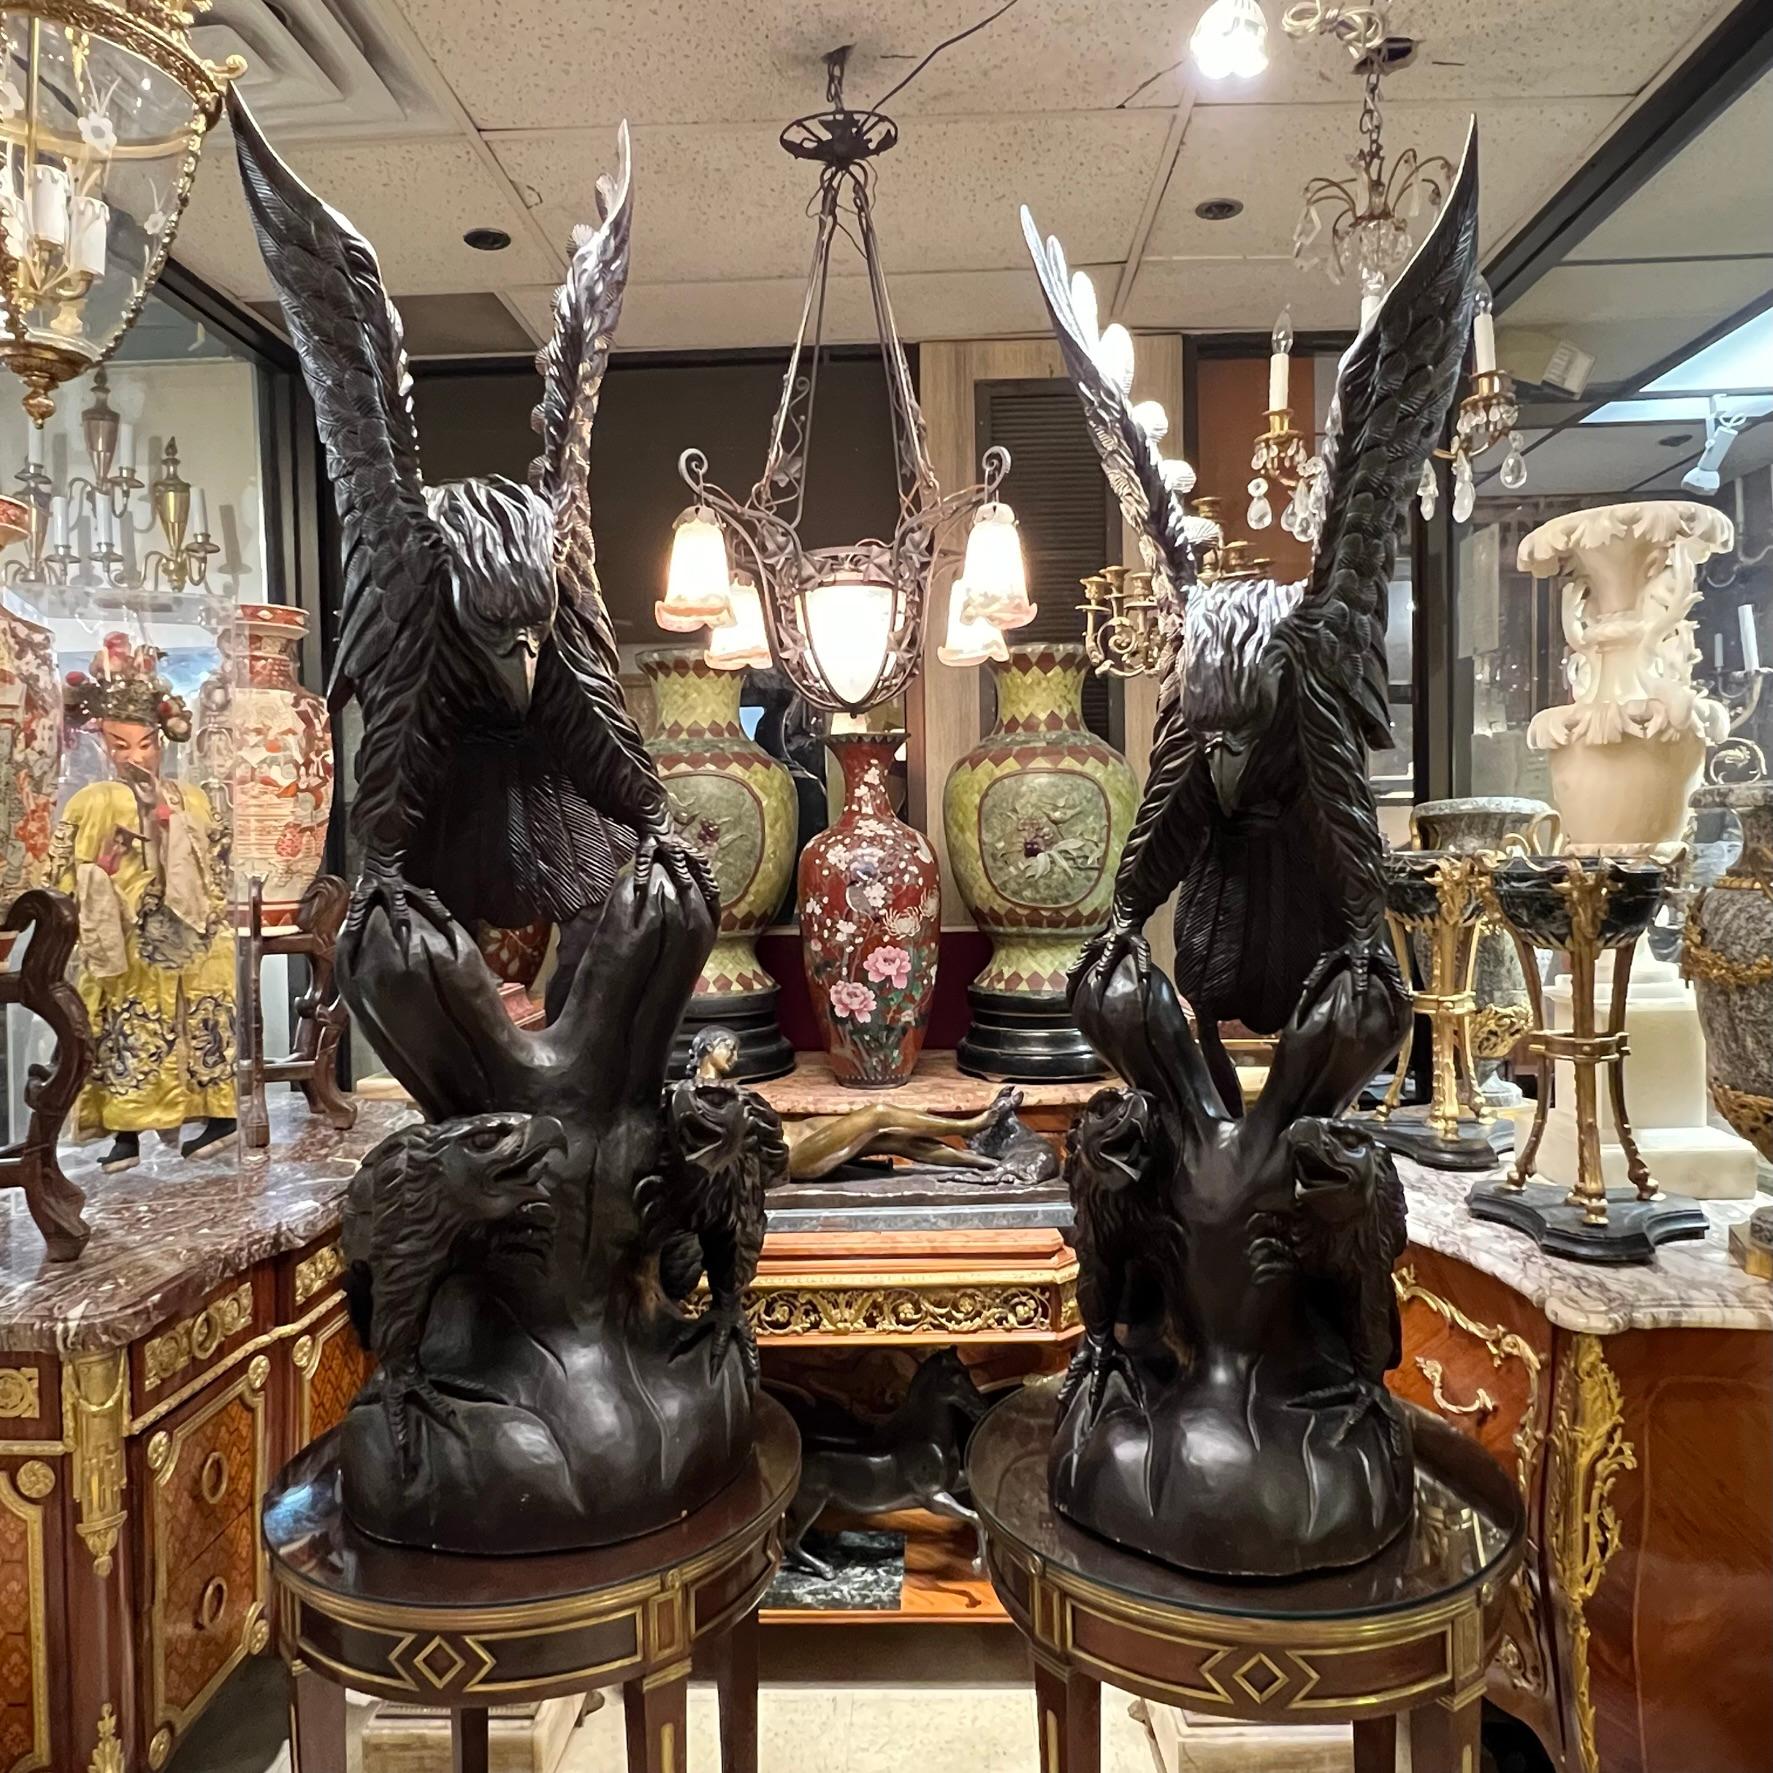 Pair of monumental carved wood statues of exceptional quality, depicting eagles standing on top of tree trunks.